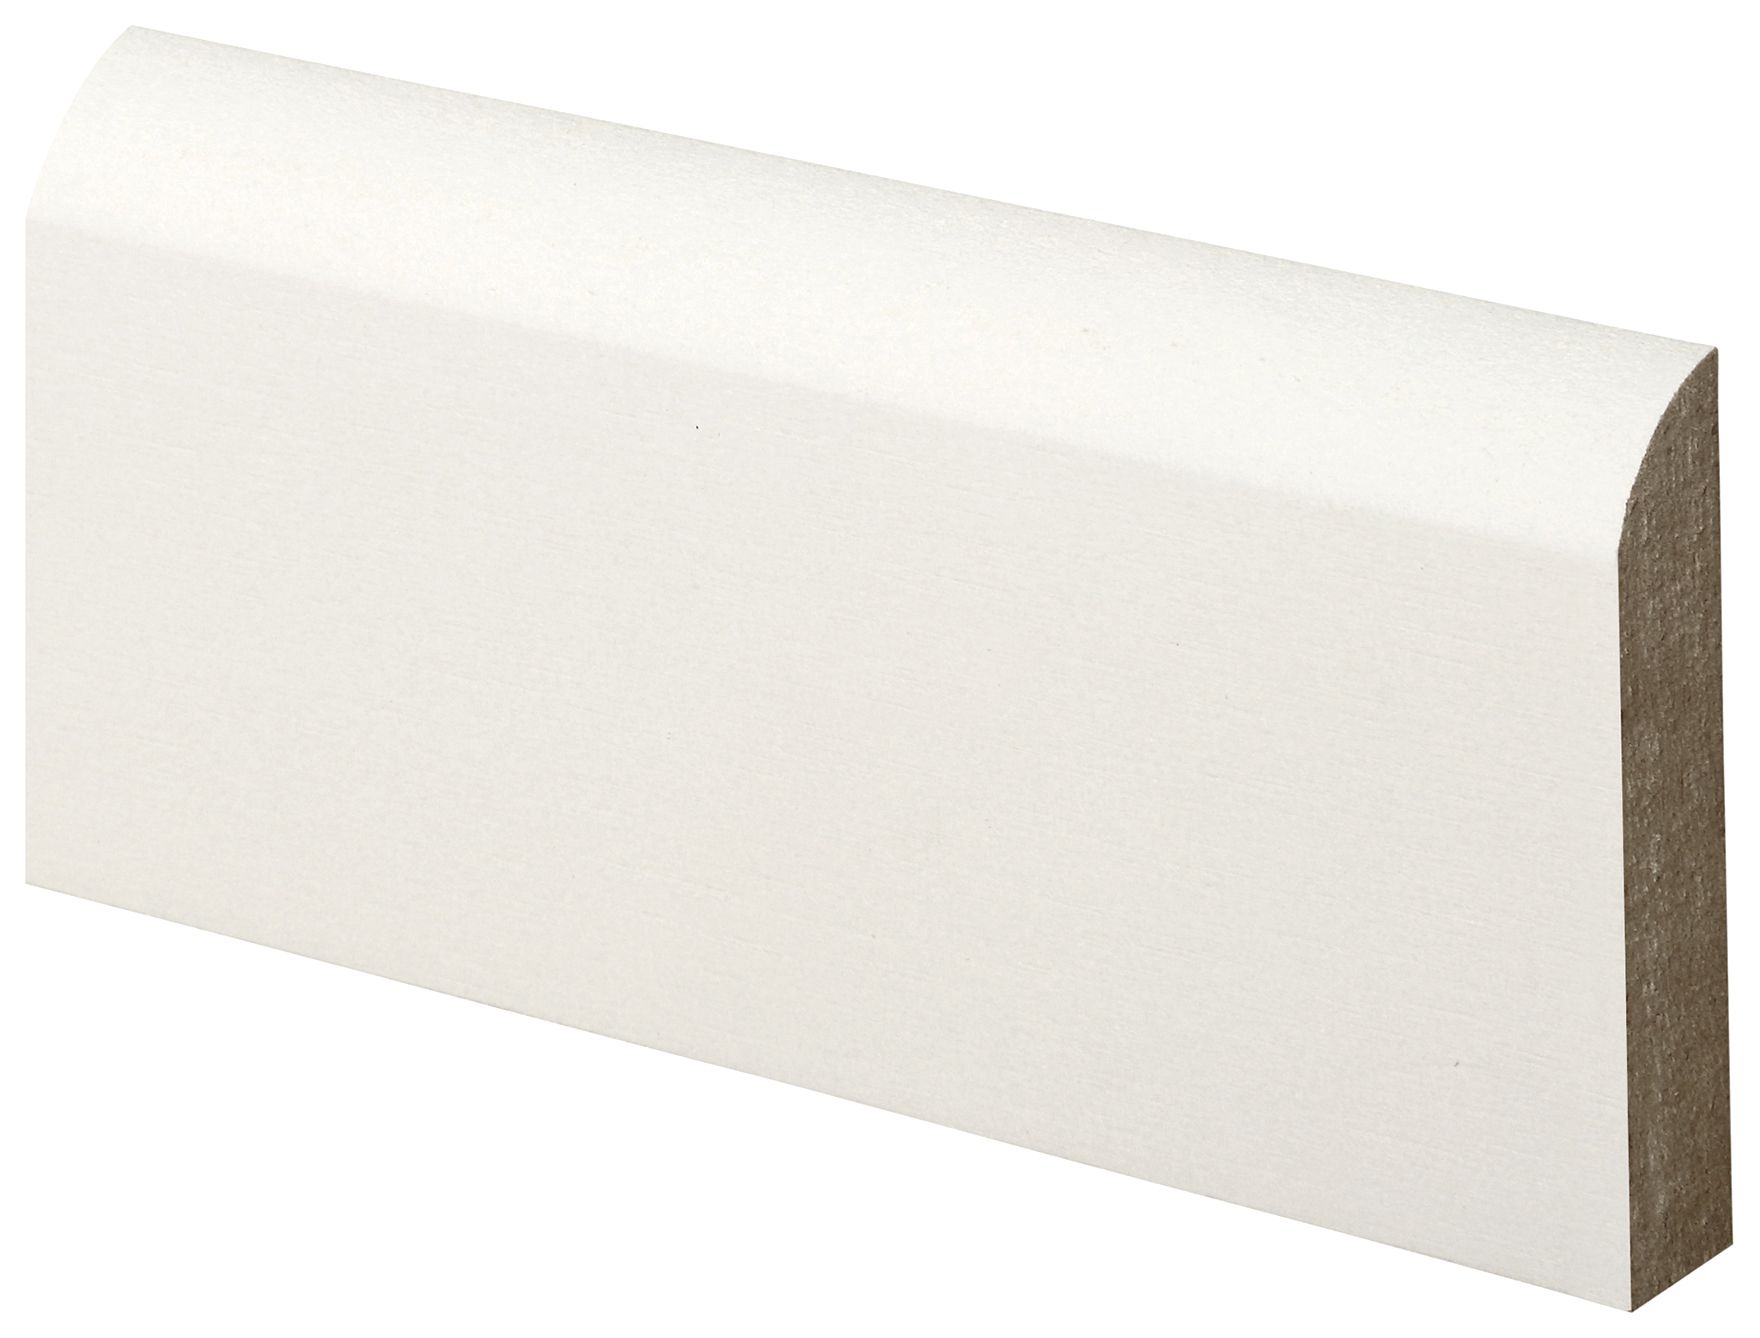 Image of Wickes Bullnose Primed MDF Architrave - 18mm x 69mm x 2.1m Pack of 5